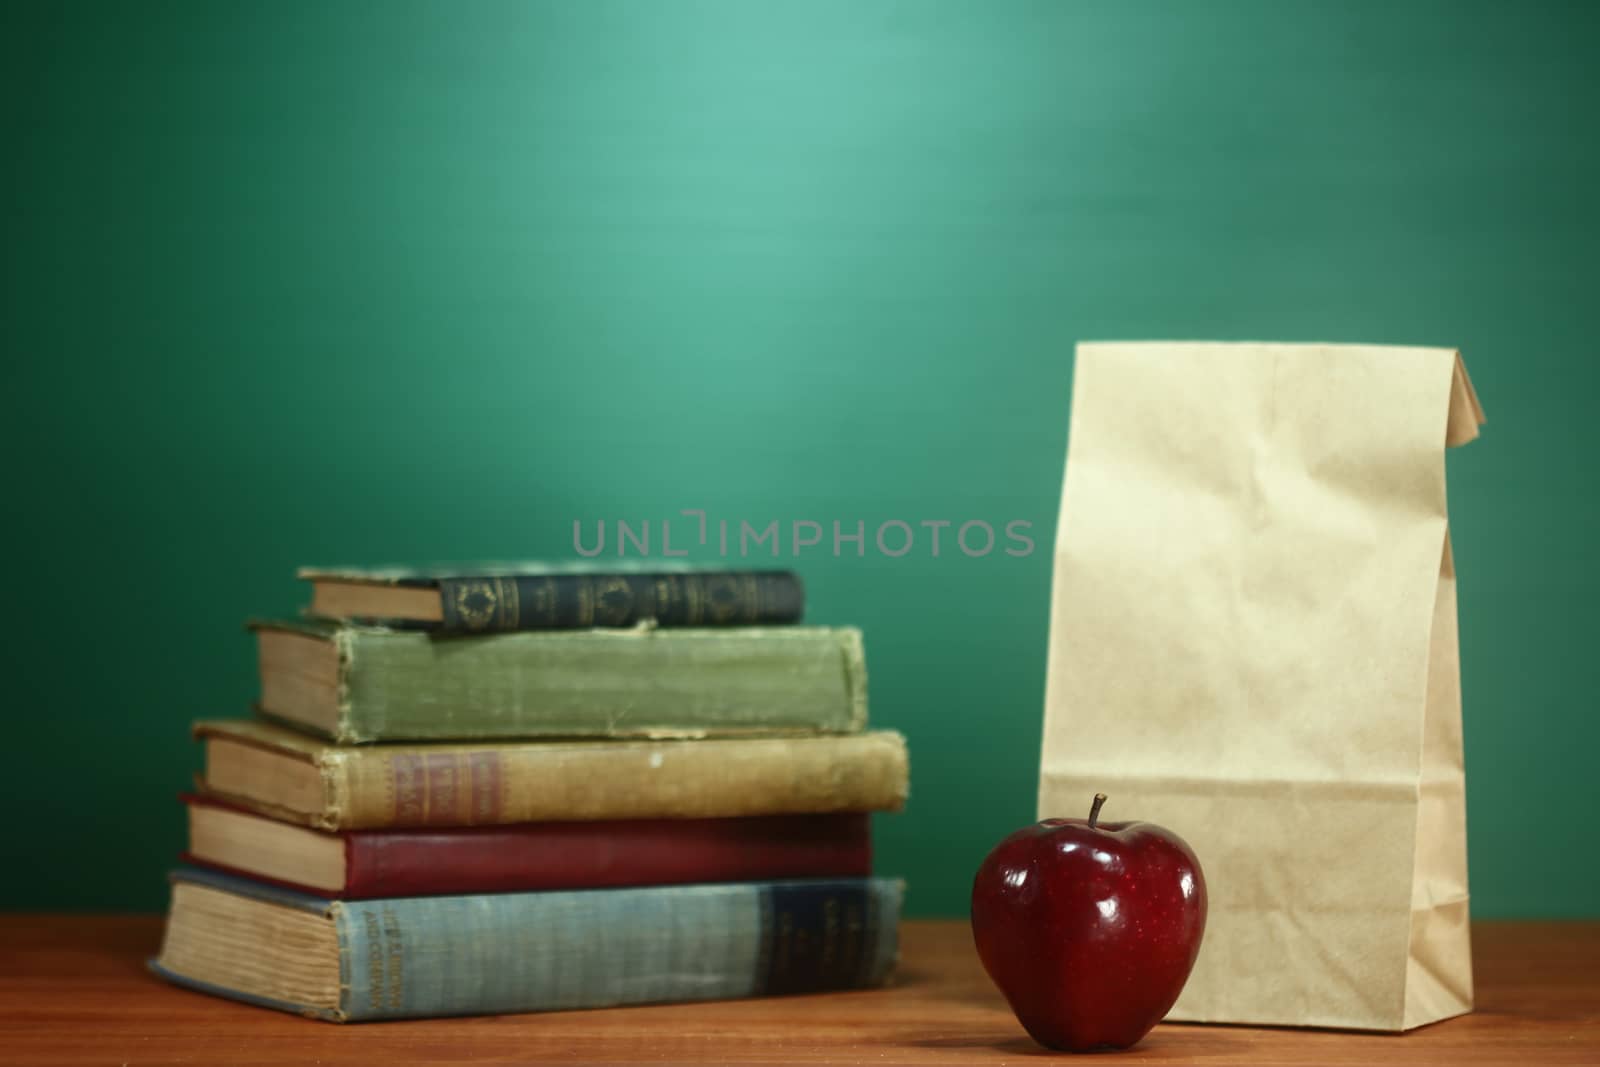 Back to School Books, Apple and Lunch on Teacher Desk